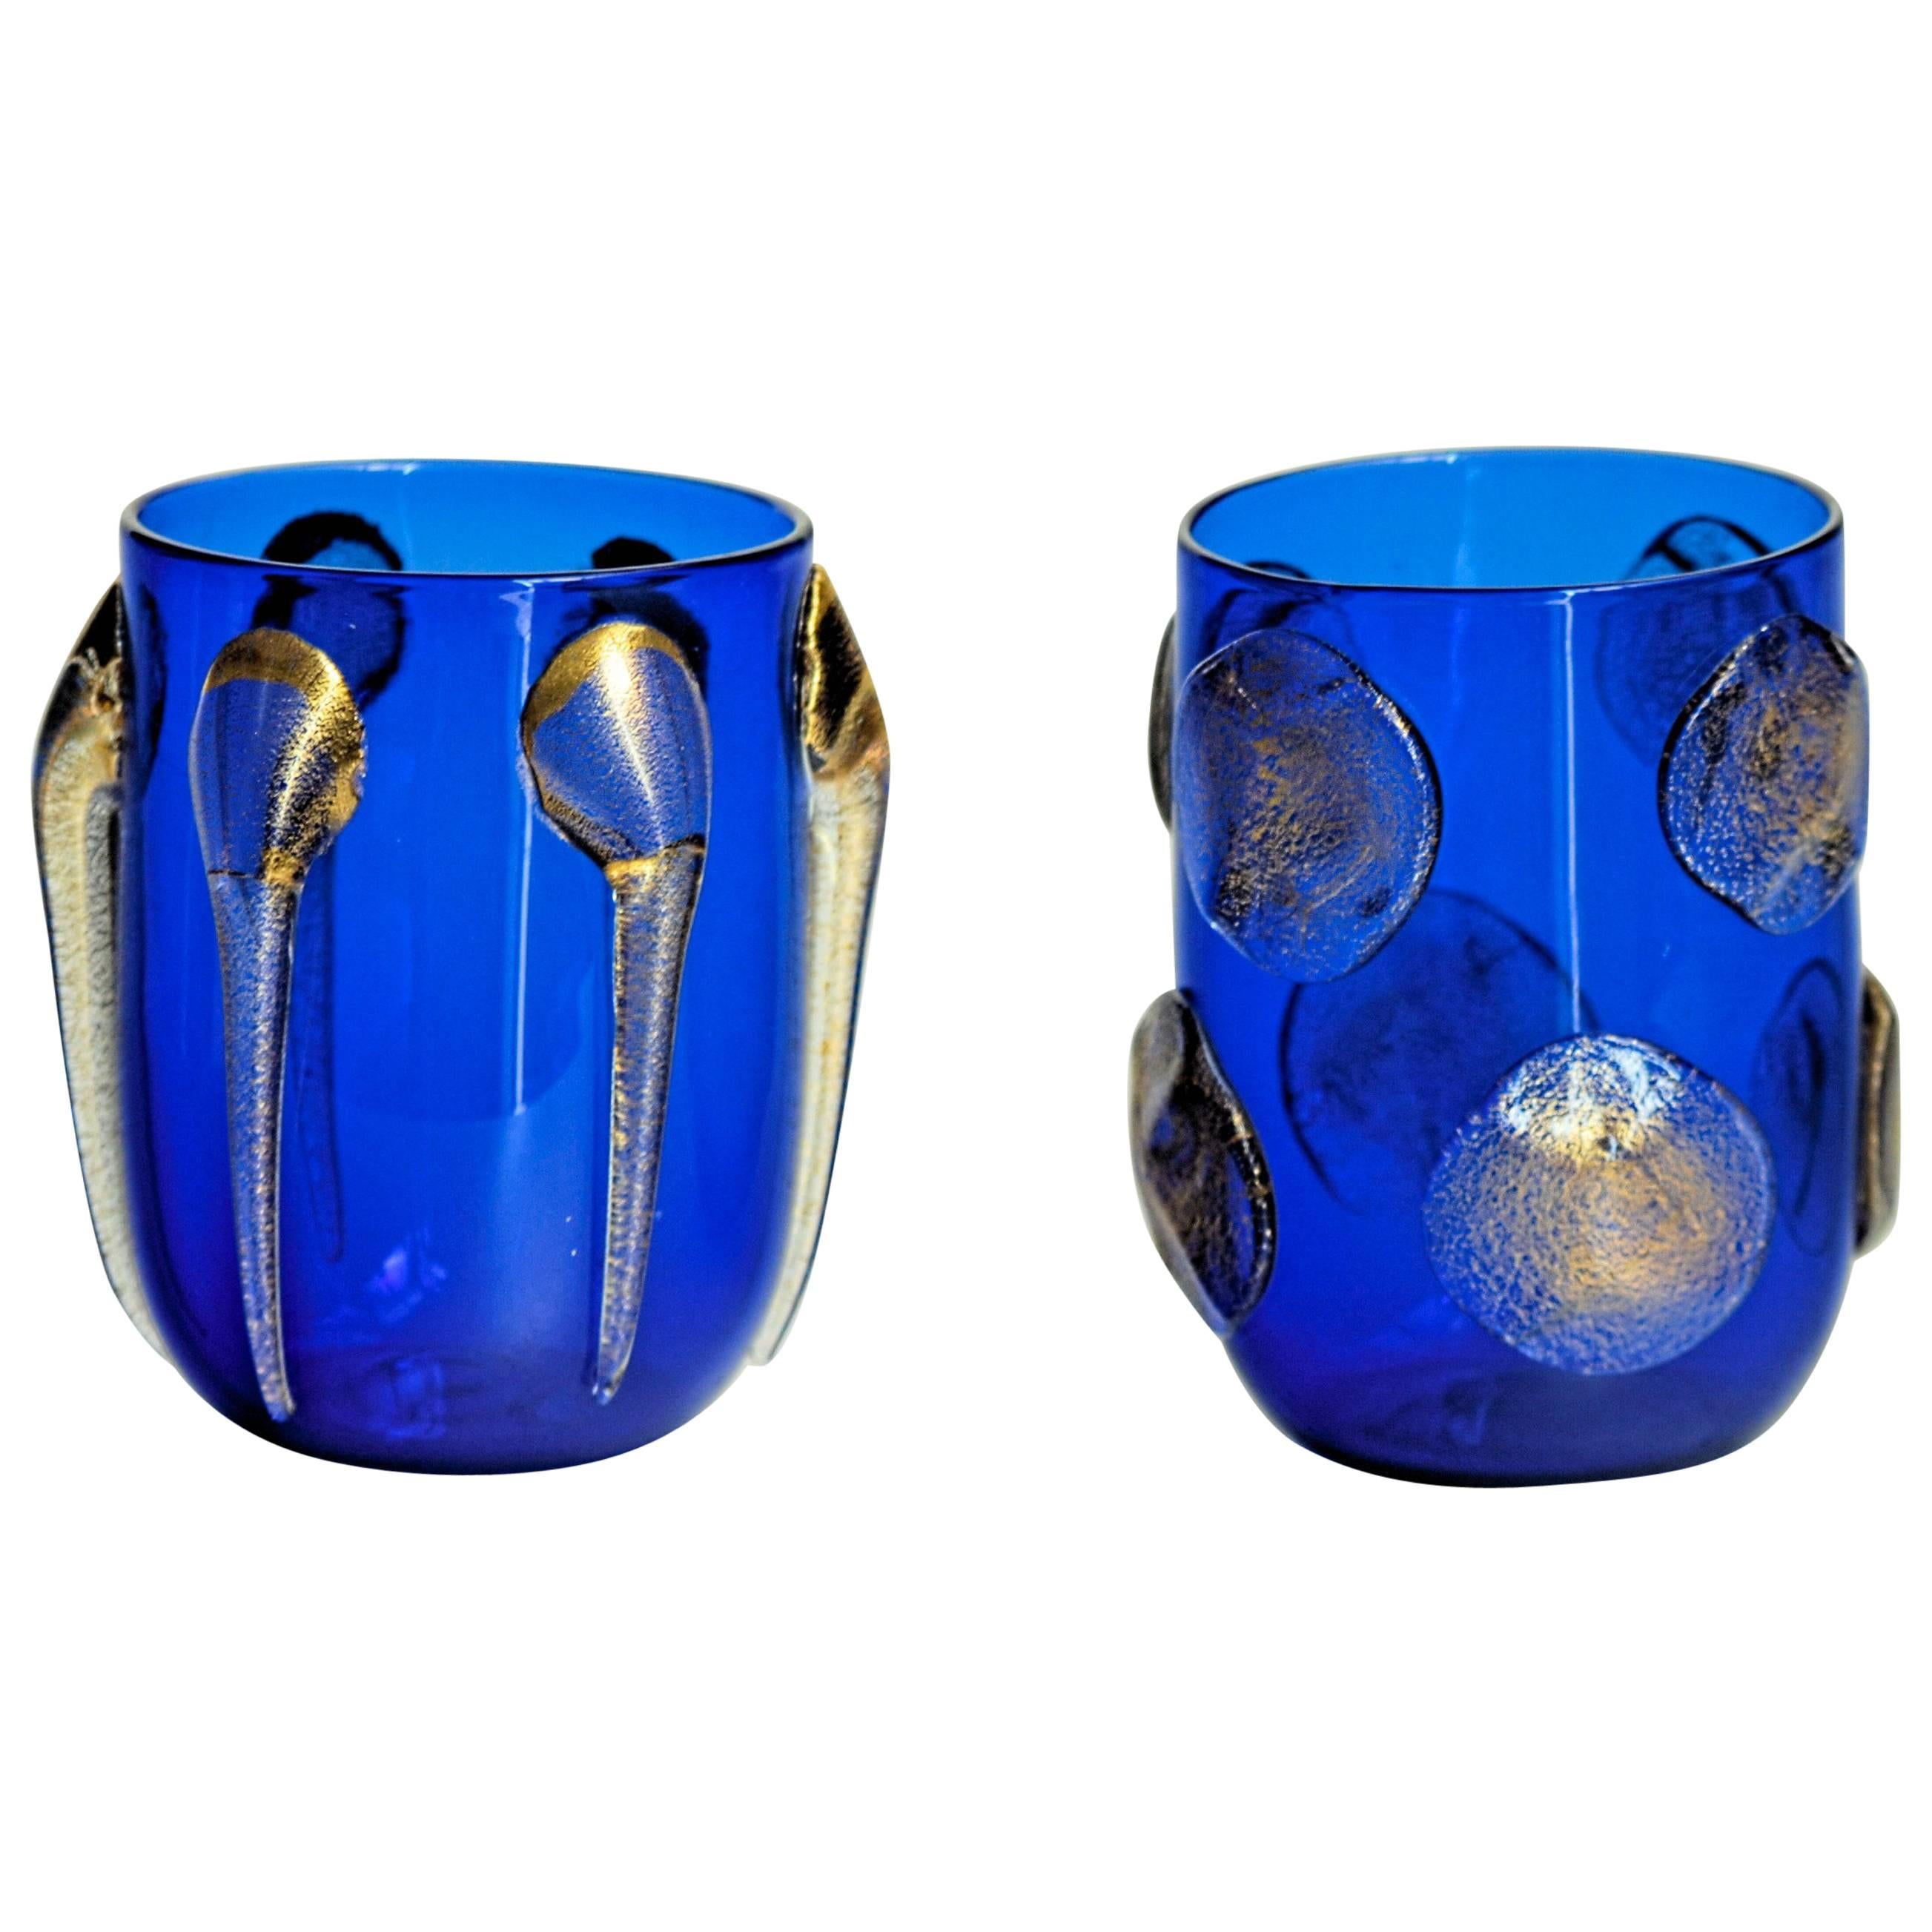 Murano Tumblers, Gold Leaf Applications over Cobalt Blue, Cenedese Style, 1990s